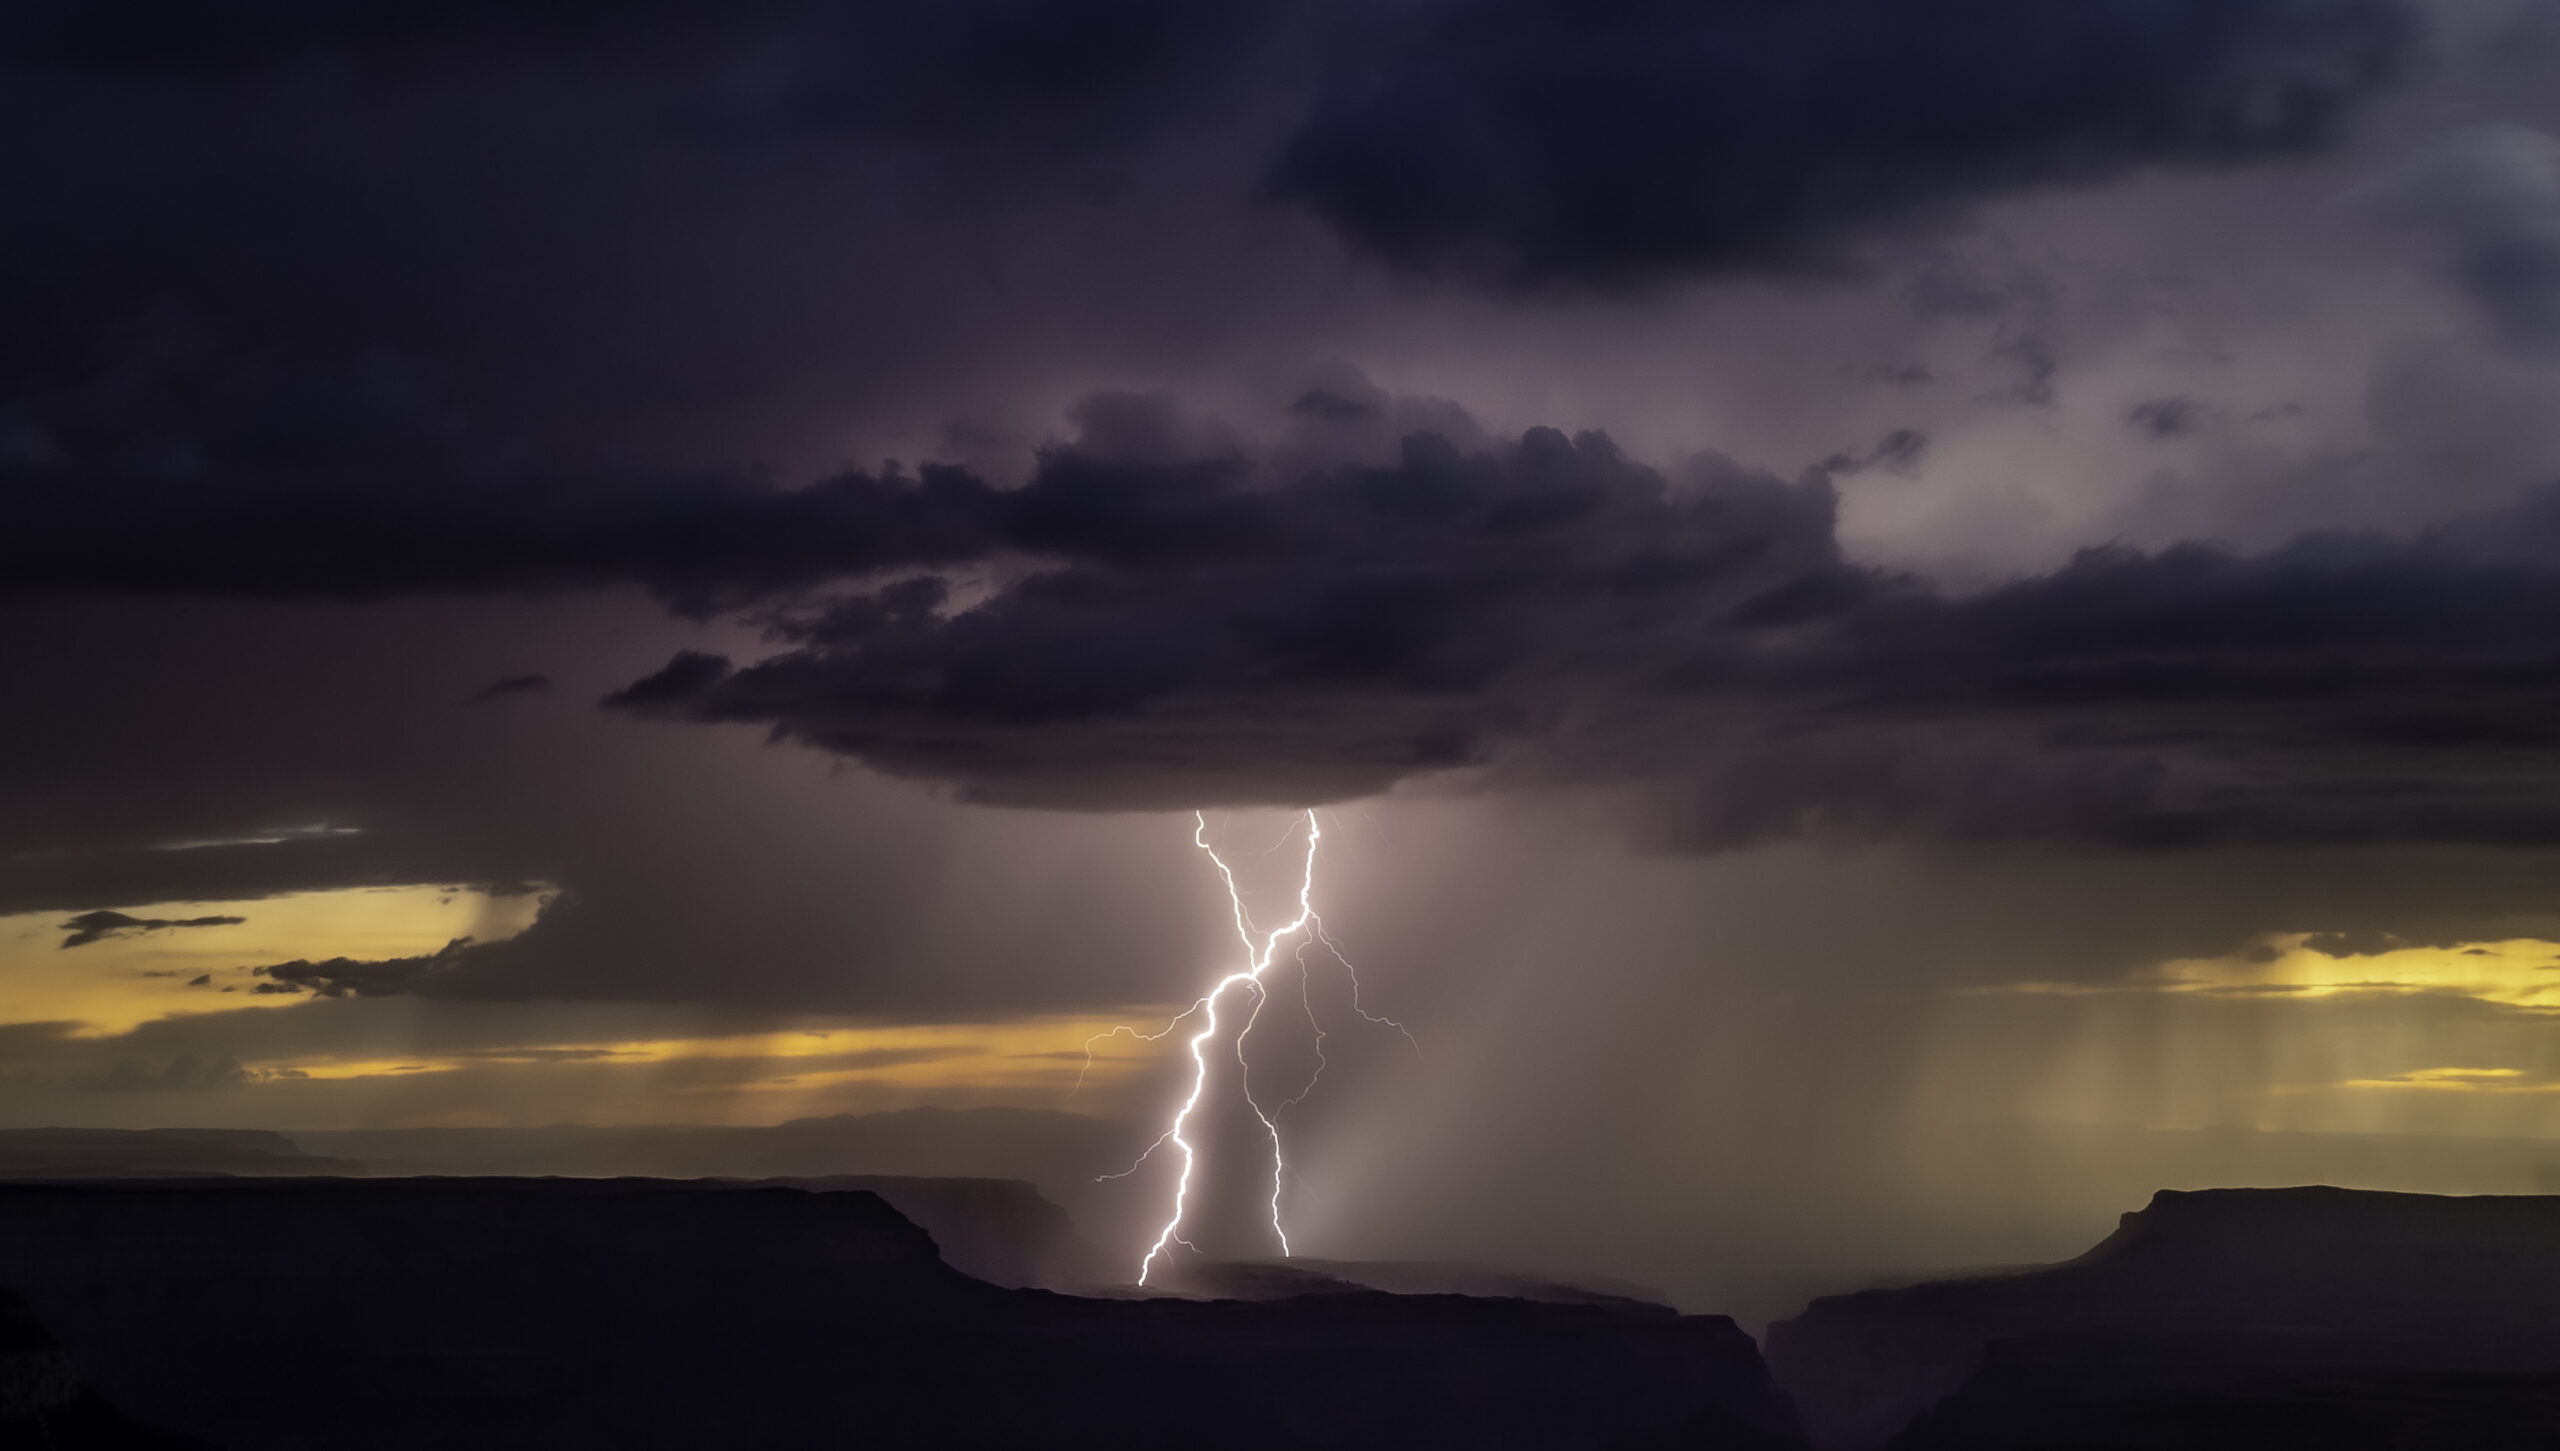 Monsoons and Sunsets at the North Rim of the Grand Canyon